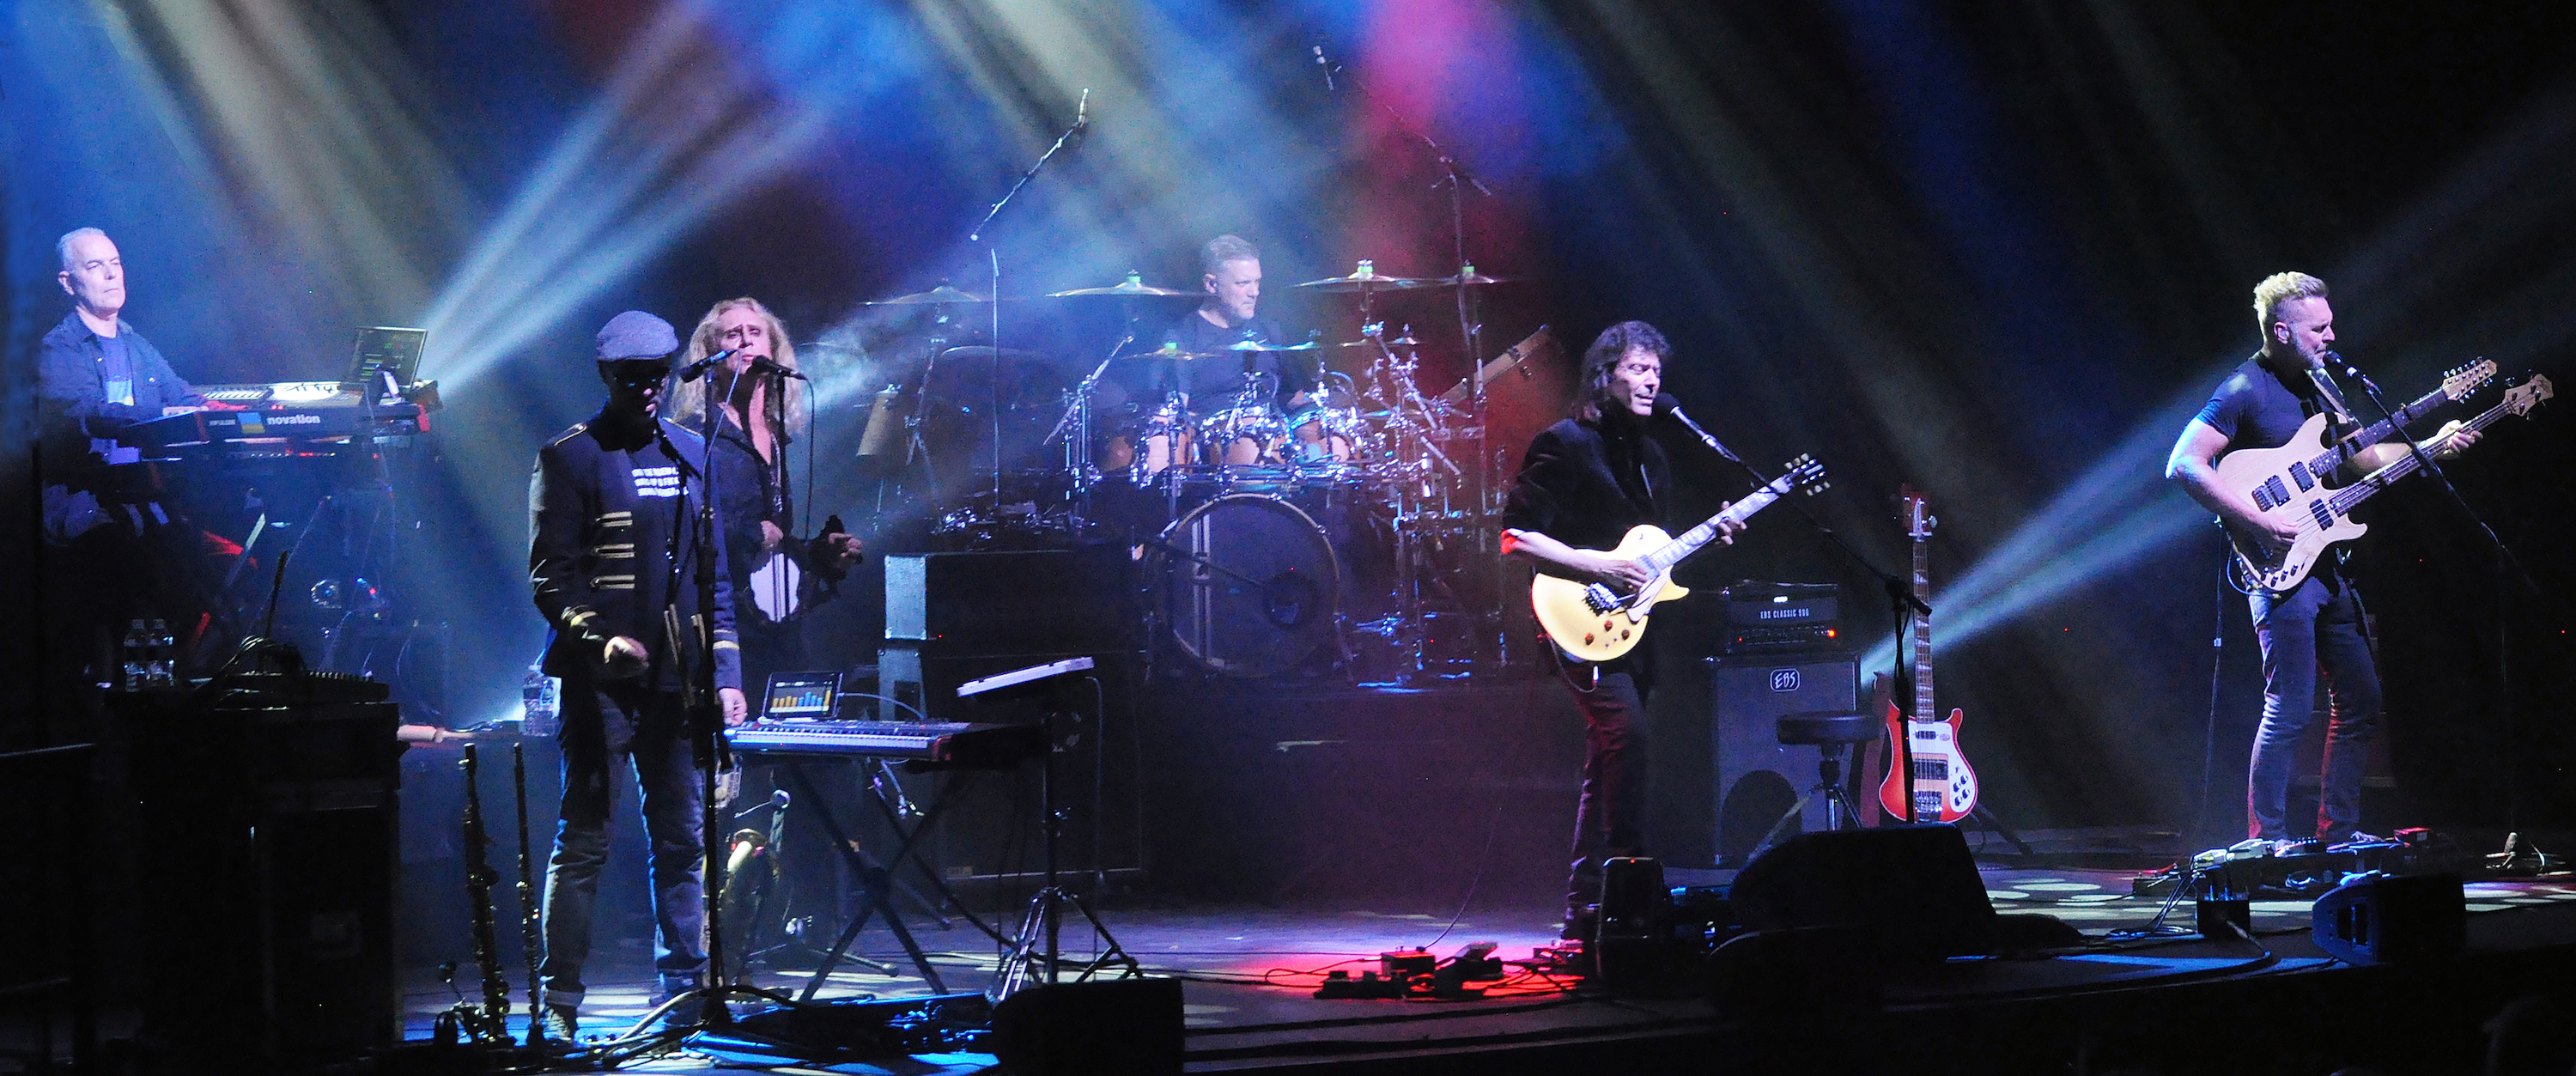 Steve Hackett & Genesis Revisited, Jump Time With “Seconds Out” Performances in Ohio